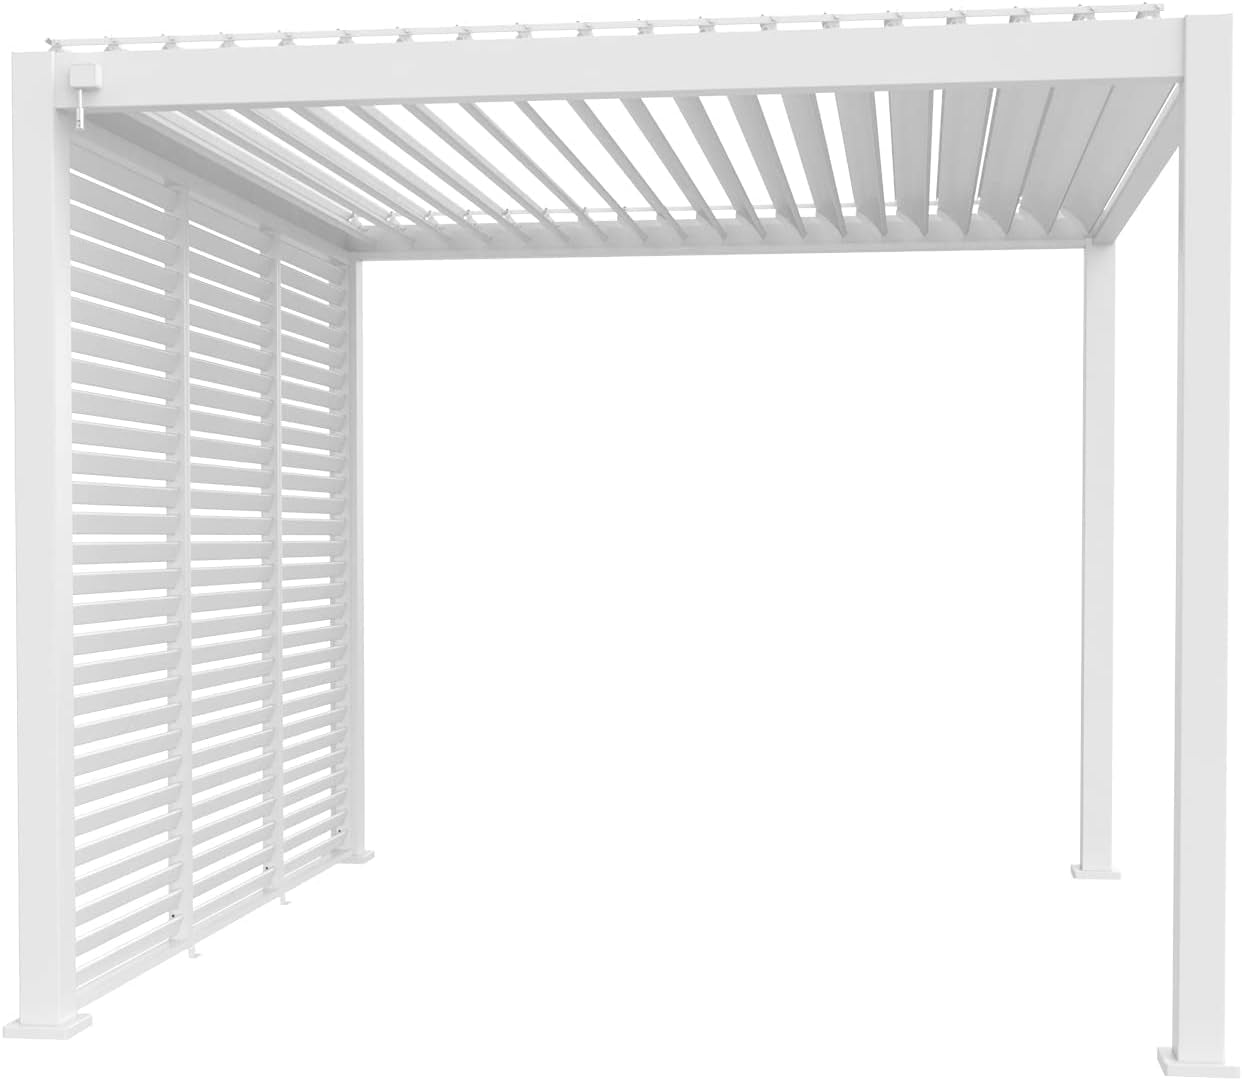 Aluminum Louvered Wall, Side Shade Privacy Screen Panel Suitable for GazeboMate Pergola Gazebo only. Pergola NOT Included. (White)